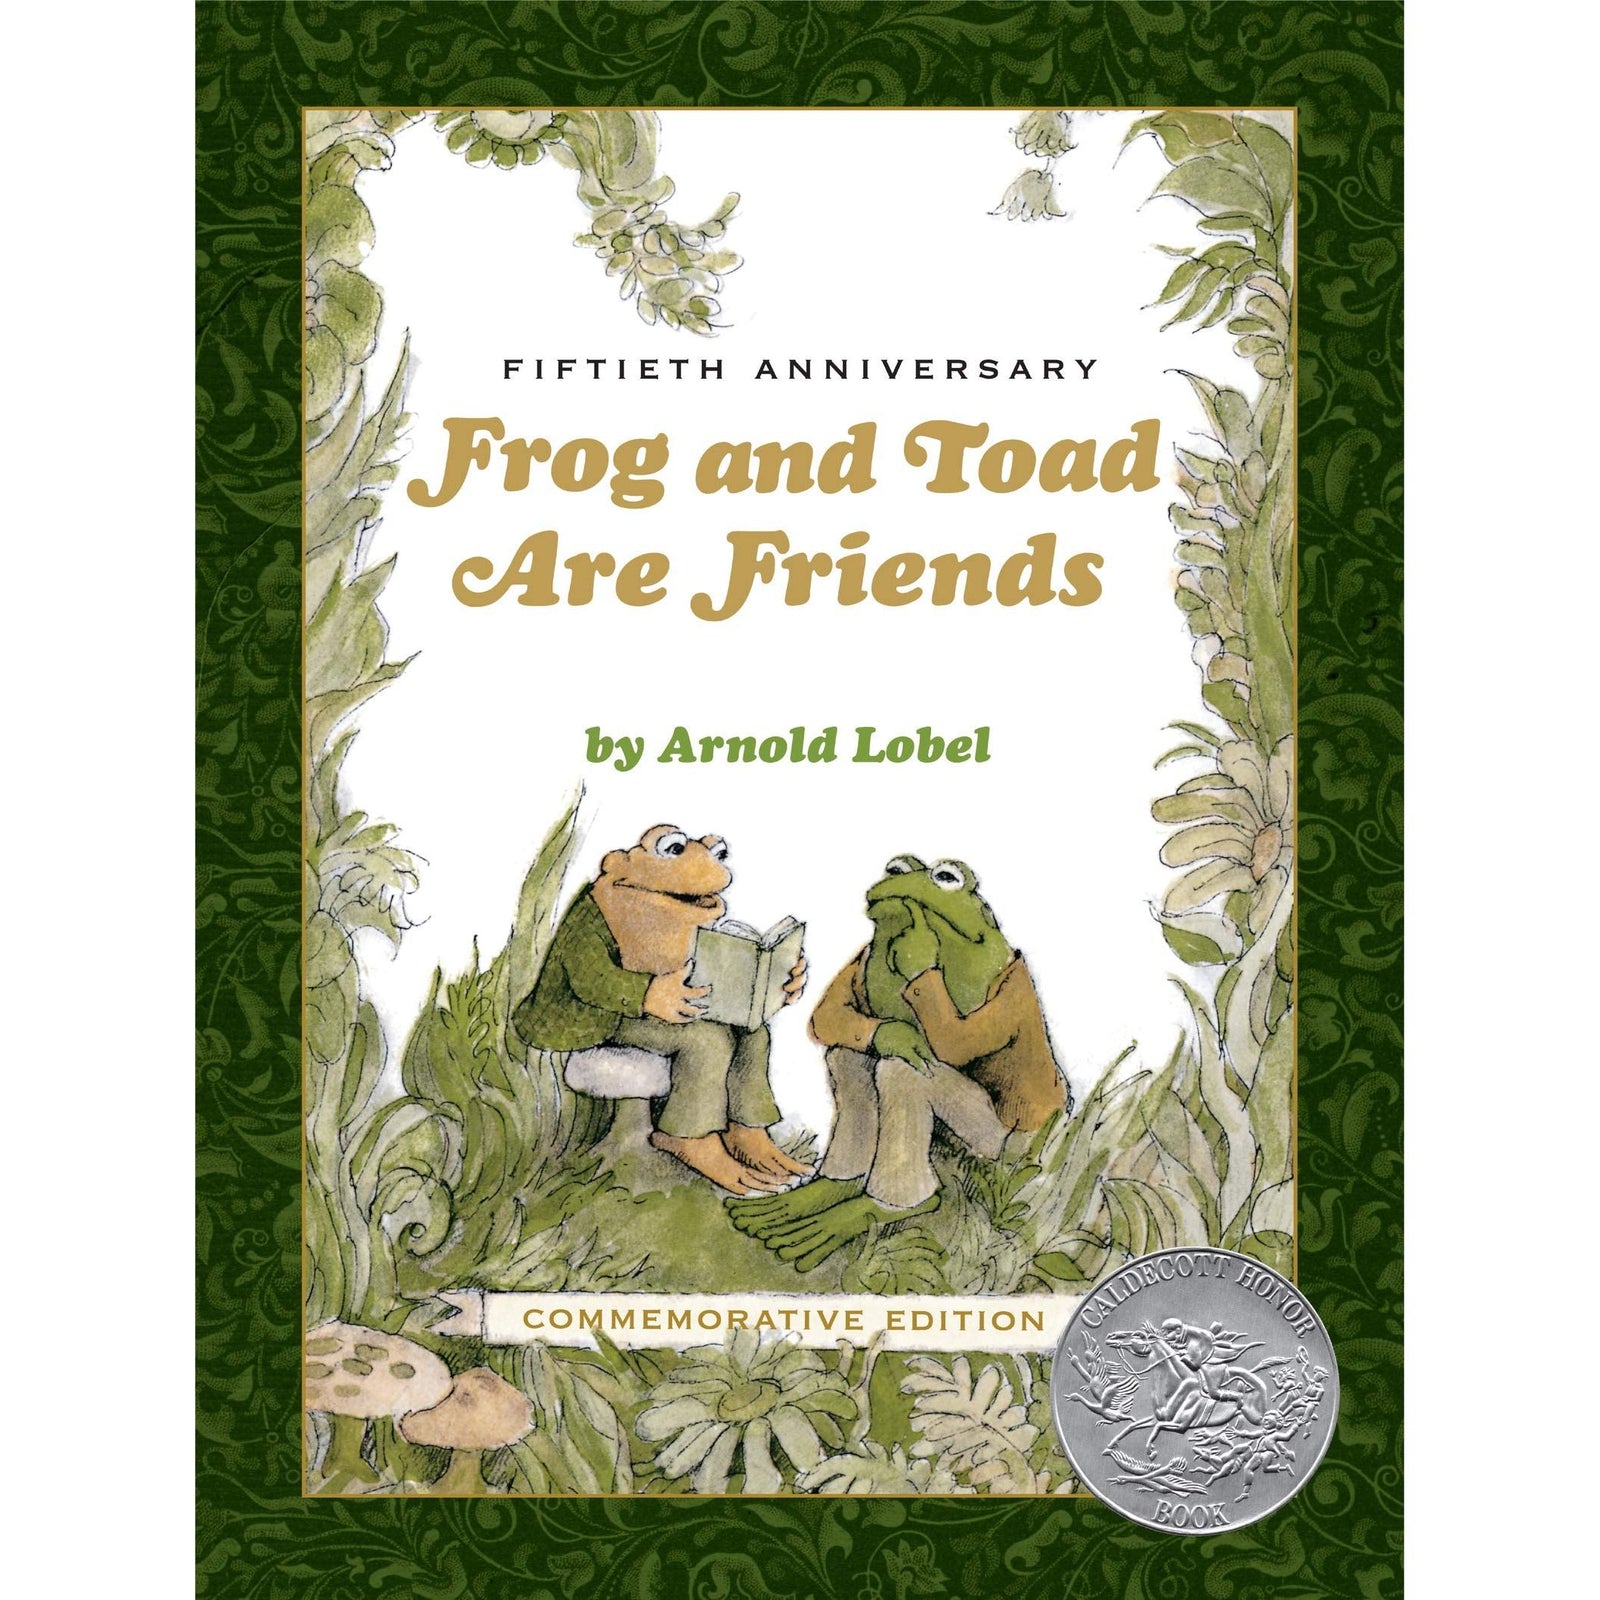 Frog and Toad Are Friends - Fiftieth Anniversary Commemorative Edition